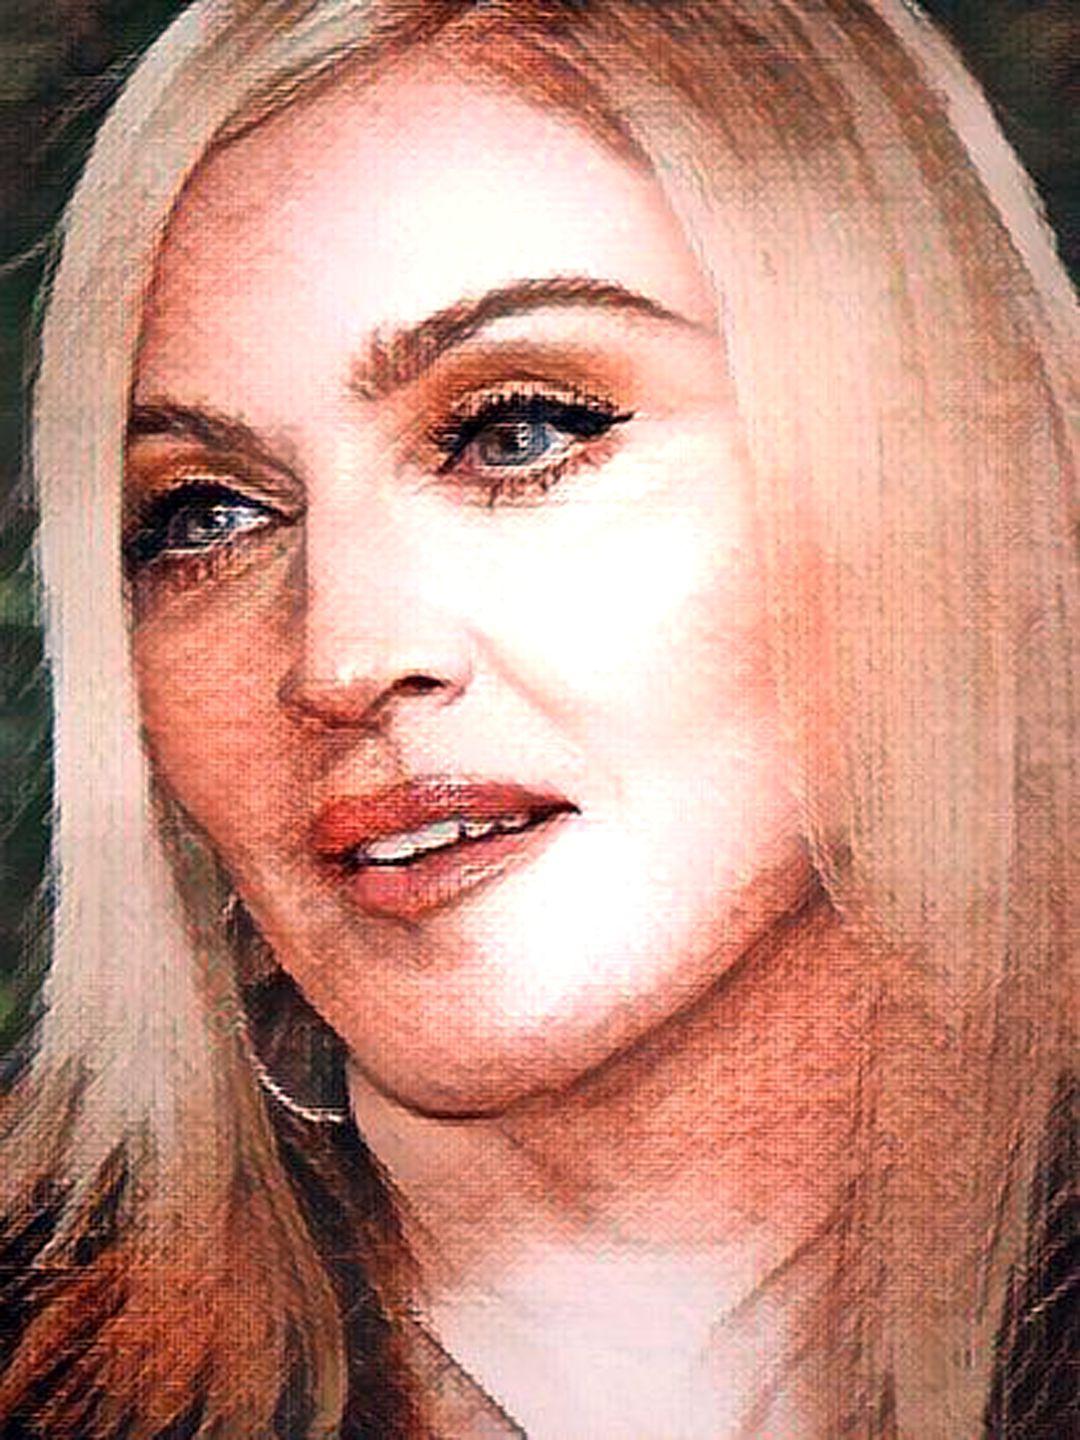 Natasha Nice Blackmail Mum And Son Xxx Sex - Madonna # 36 - Celeb ART - Beautiful Artworks of Celebrities, Footballers,  Politicians and Famous People in World | OpenSea